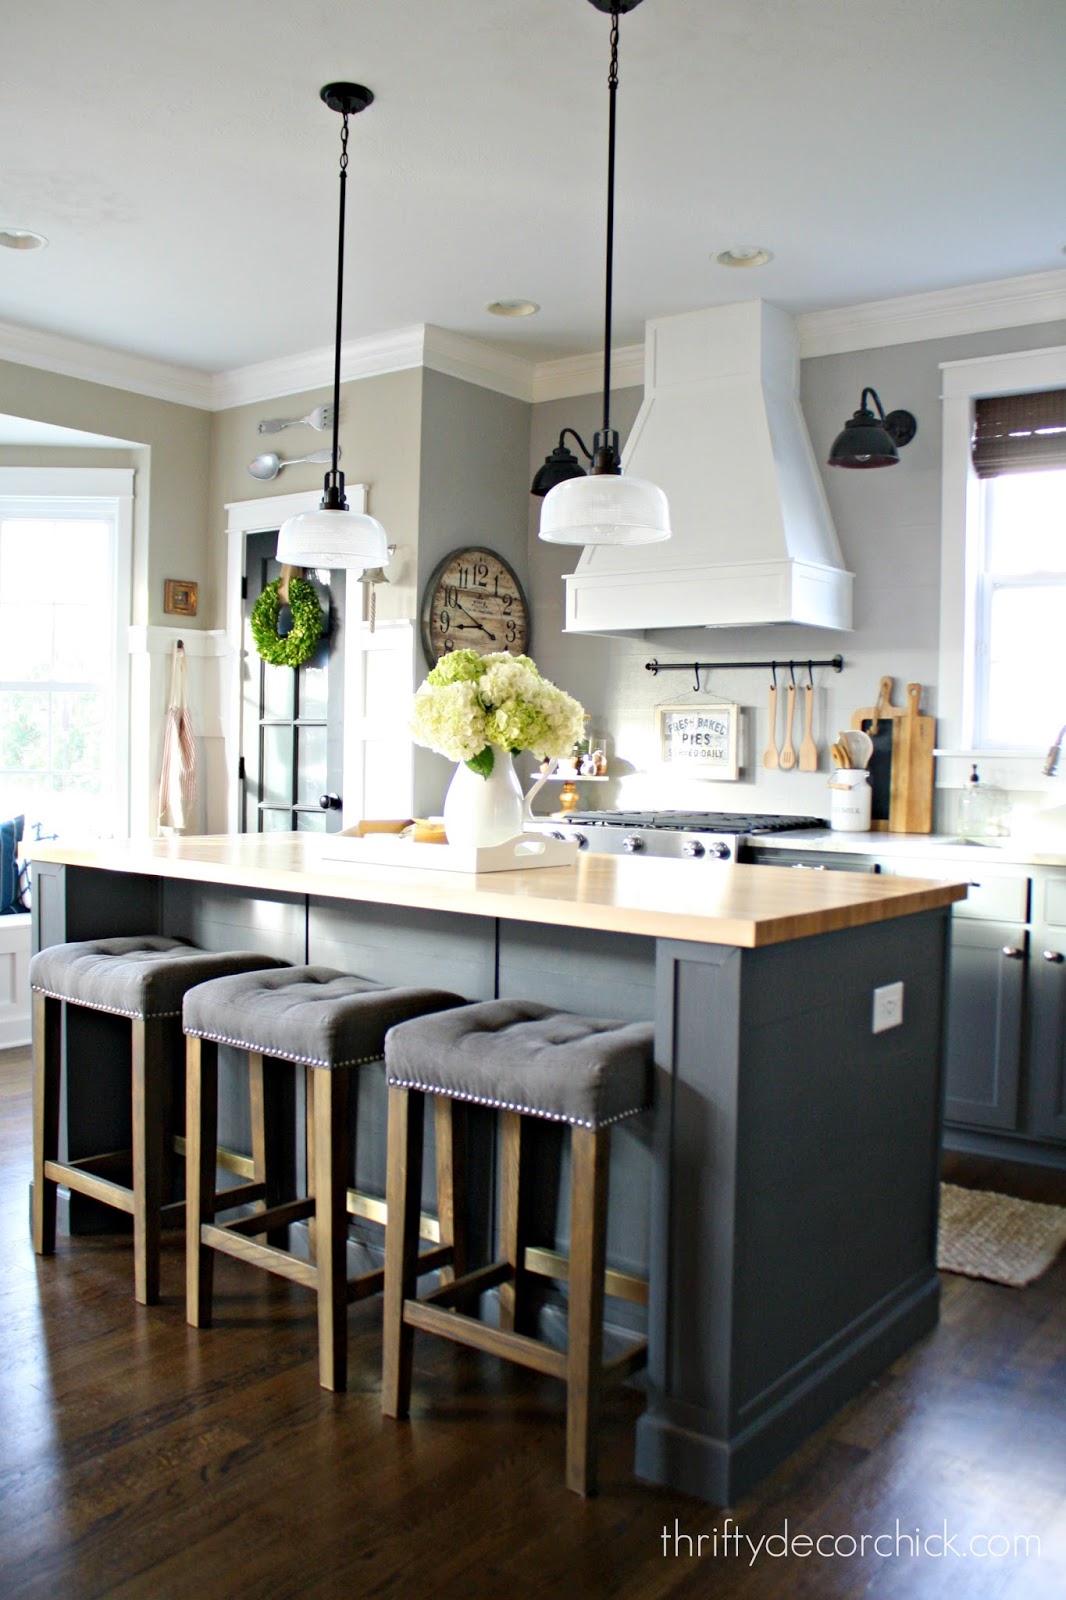 The Kitchen  Renovation Budget and How I Saved from 